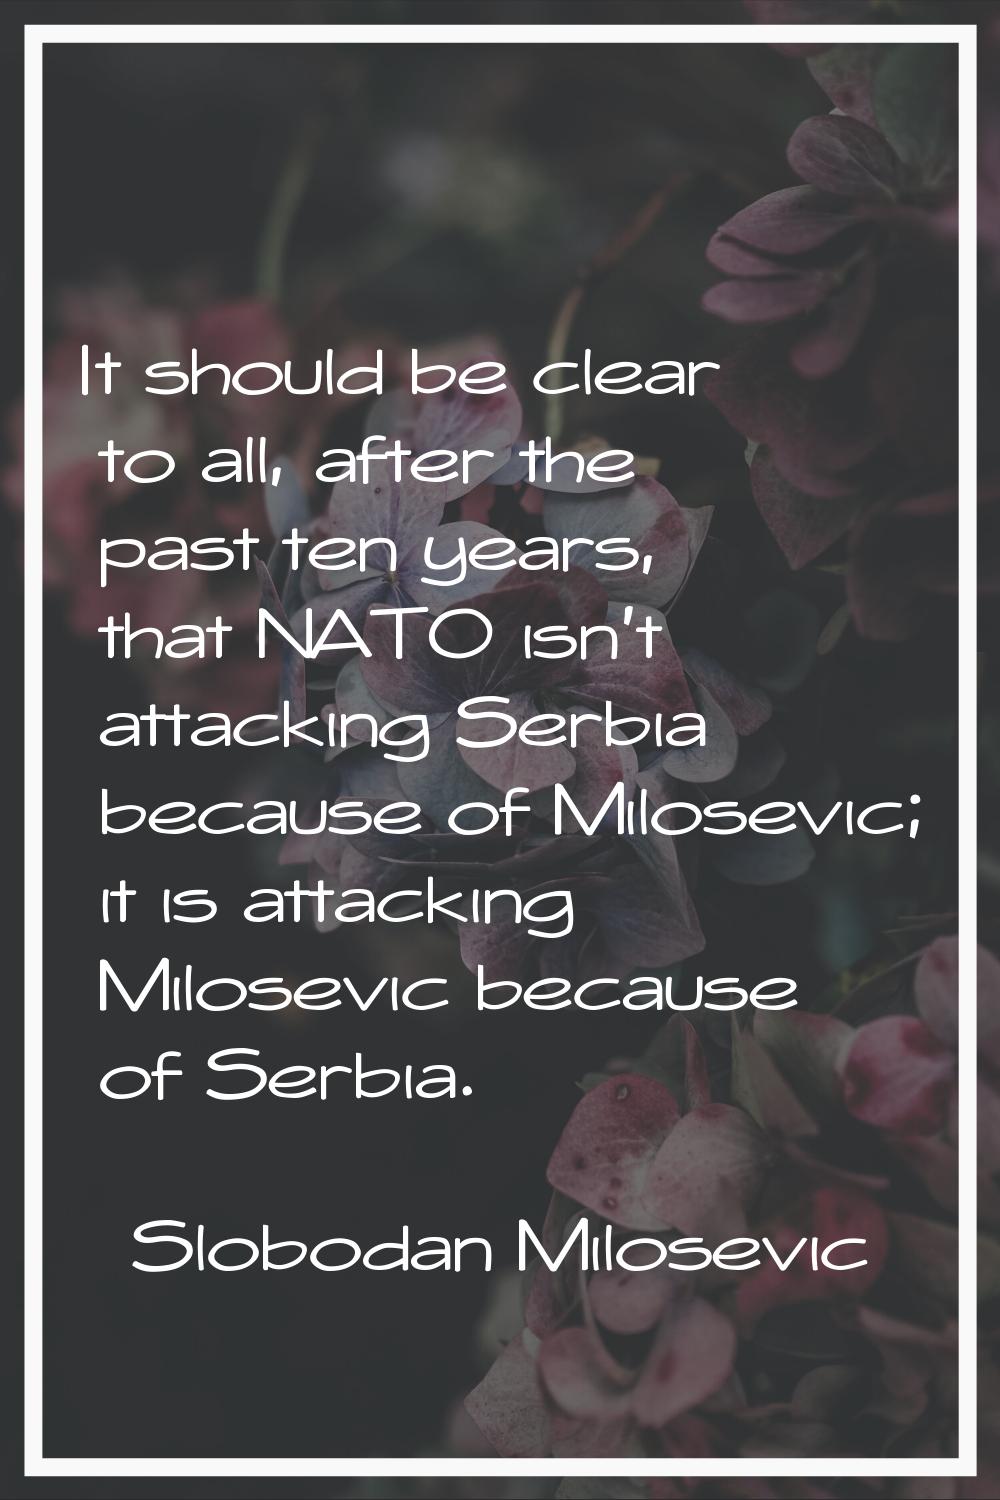 It should be clear to all, after the past ten years, that NATO isn't attacking Serbia because of Mi